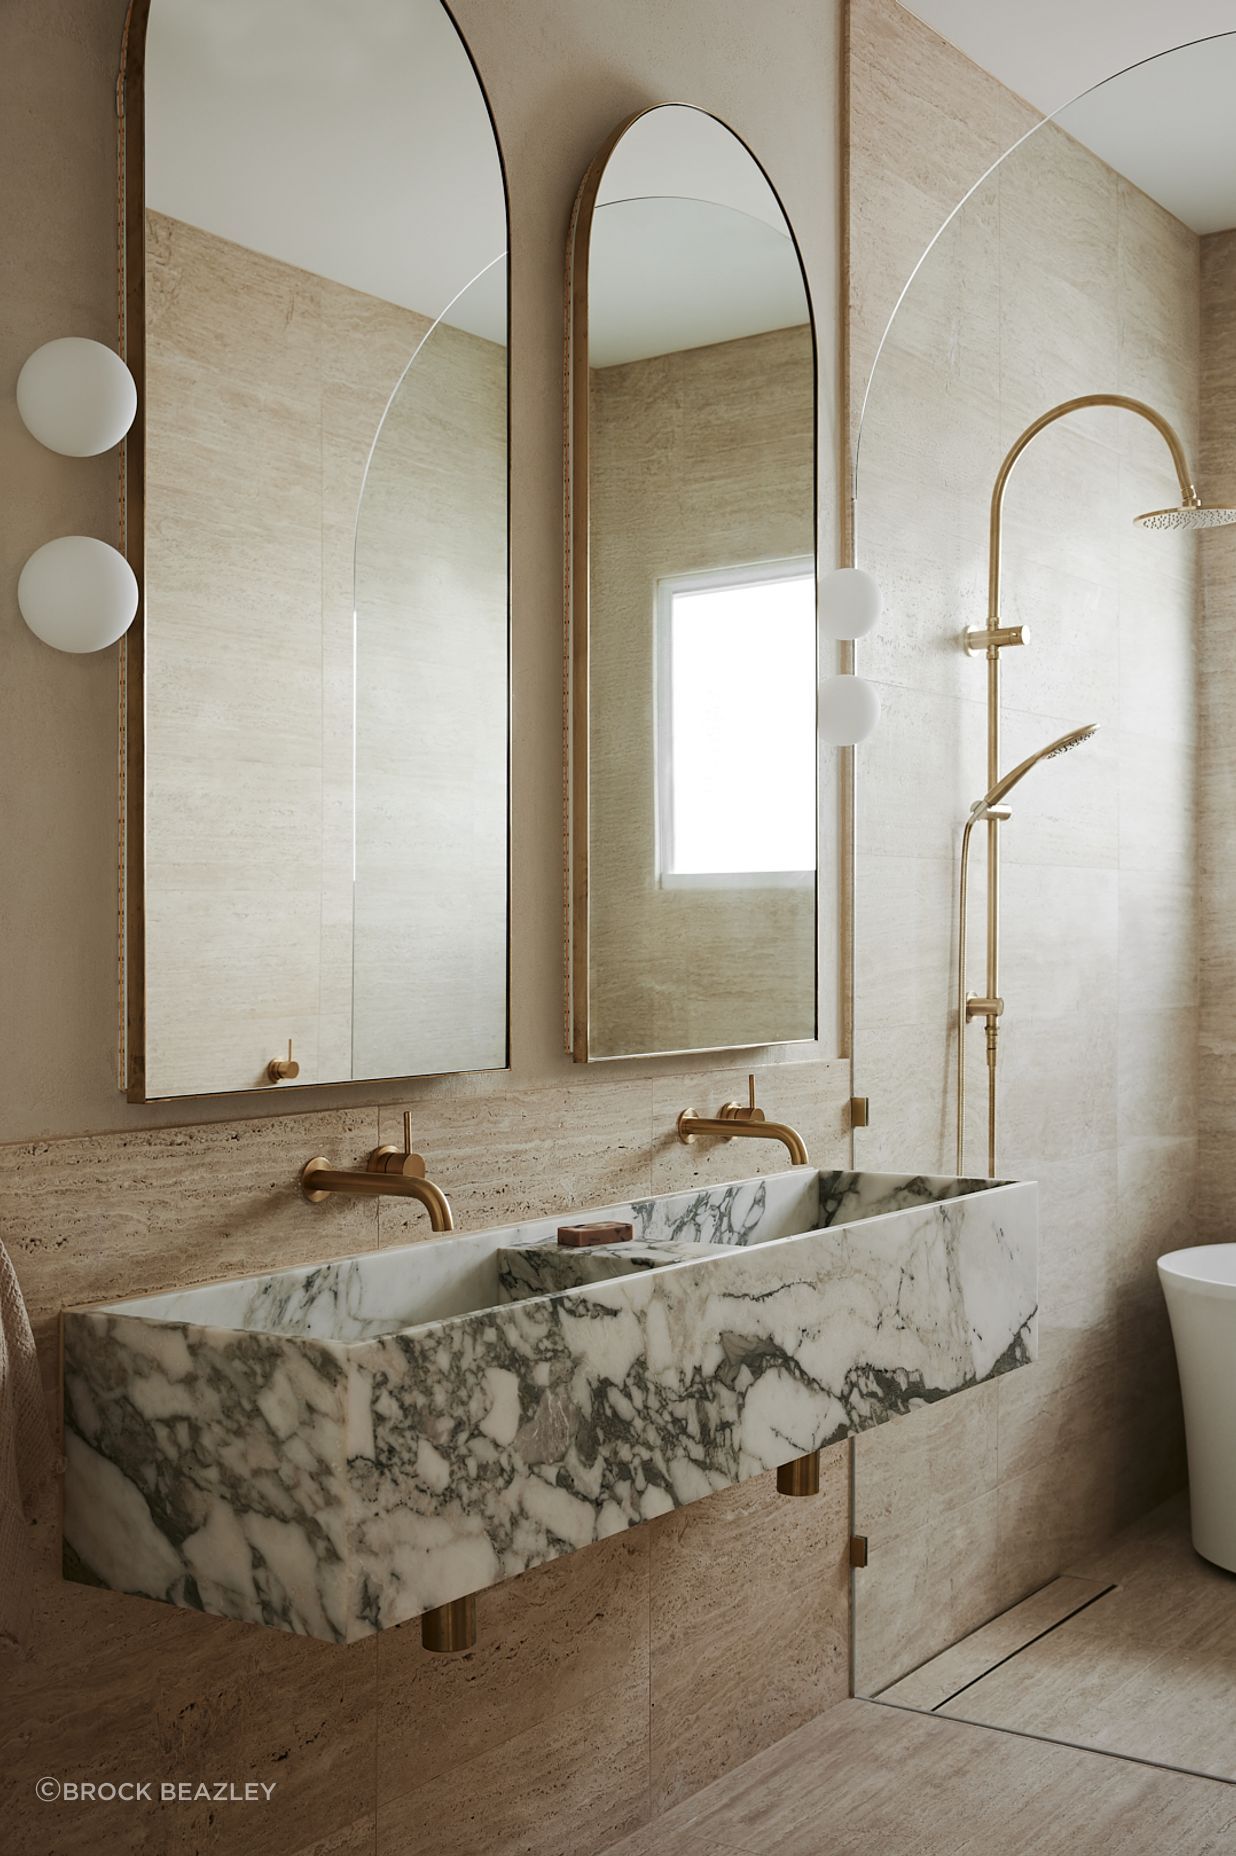 In the bathroom, bold stone elements contrast against brass and curves for a truly high-end feel.